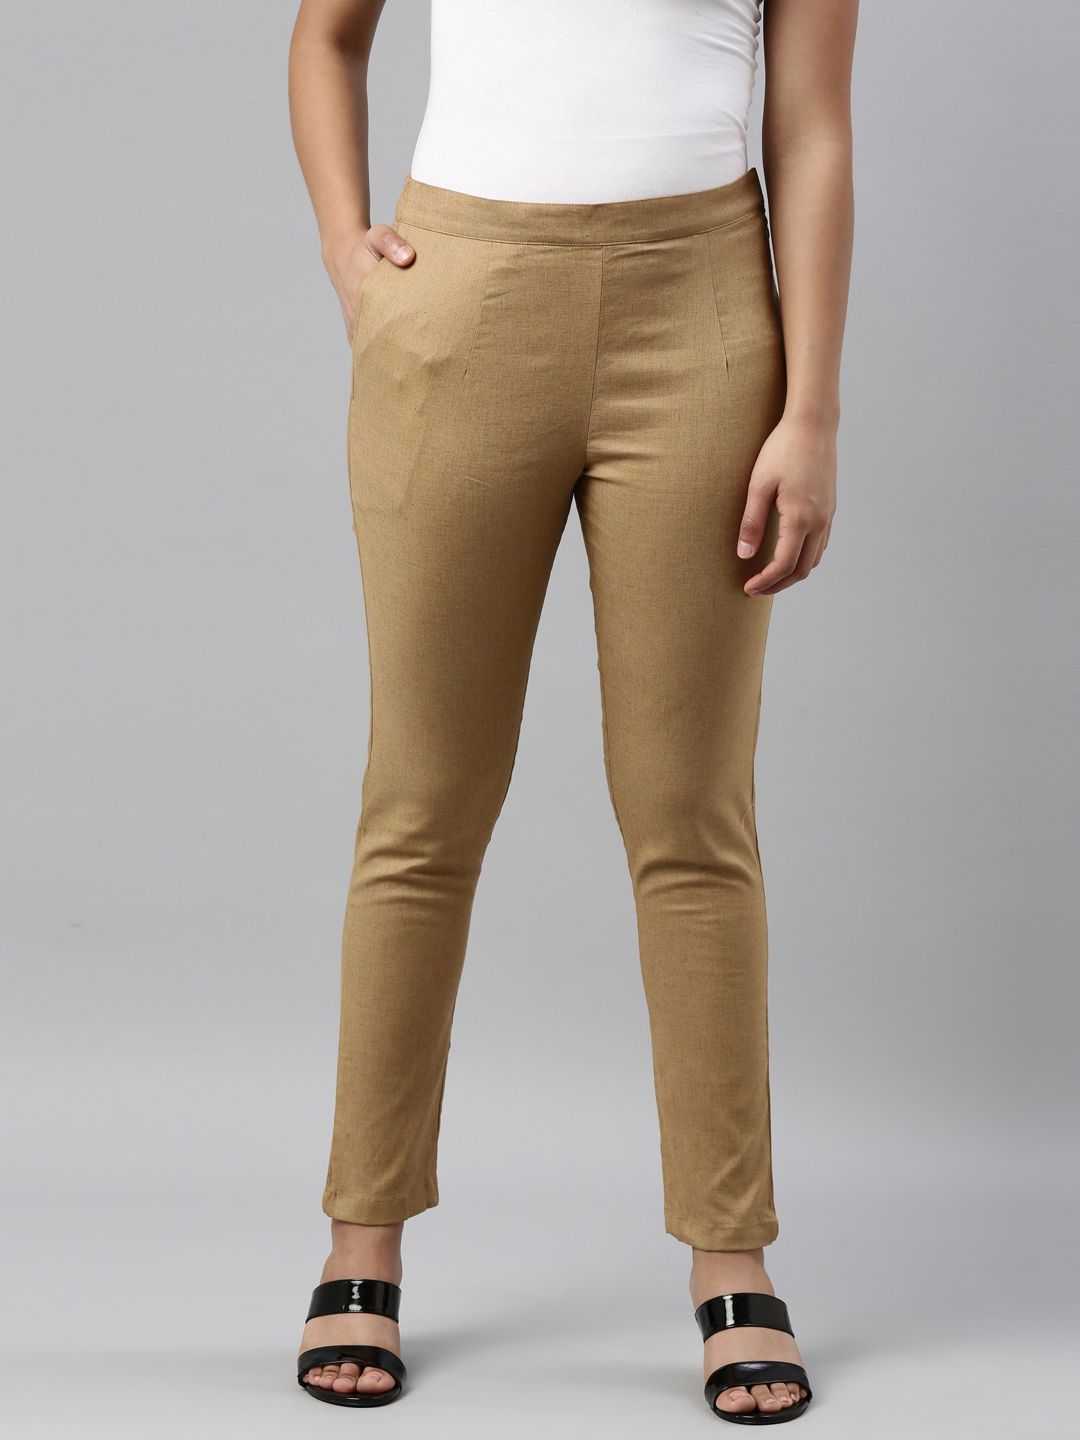 Humaira Fashions Plain Ladies Cotton Pencil Pant, Waist Size: 28-36 at Rs  210/piece in New Delhi